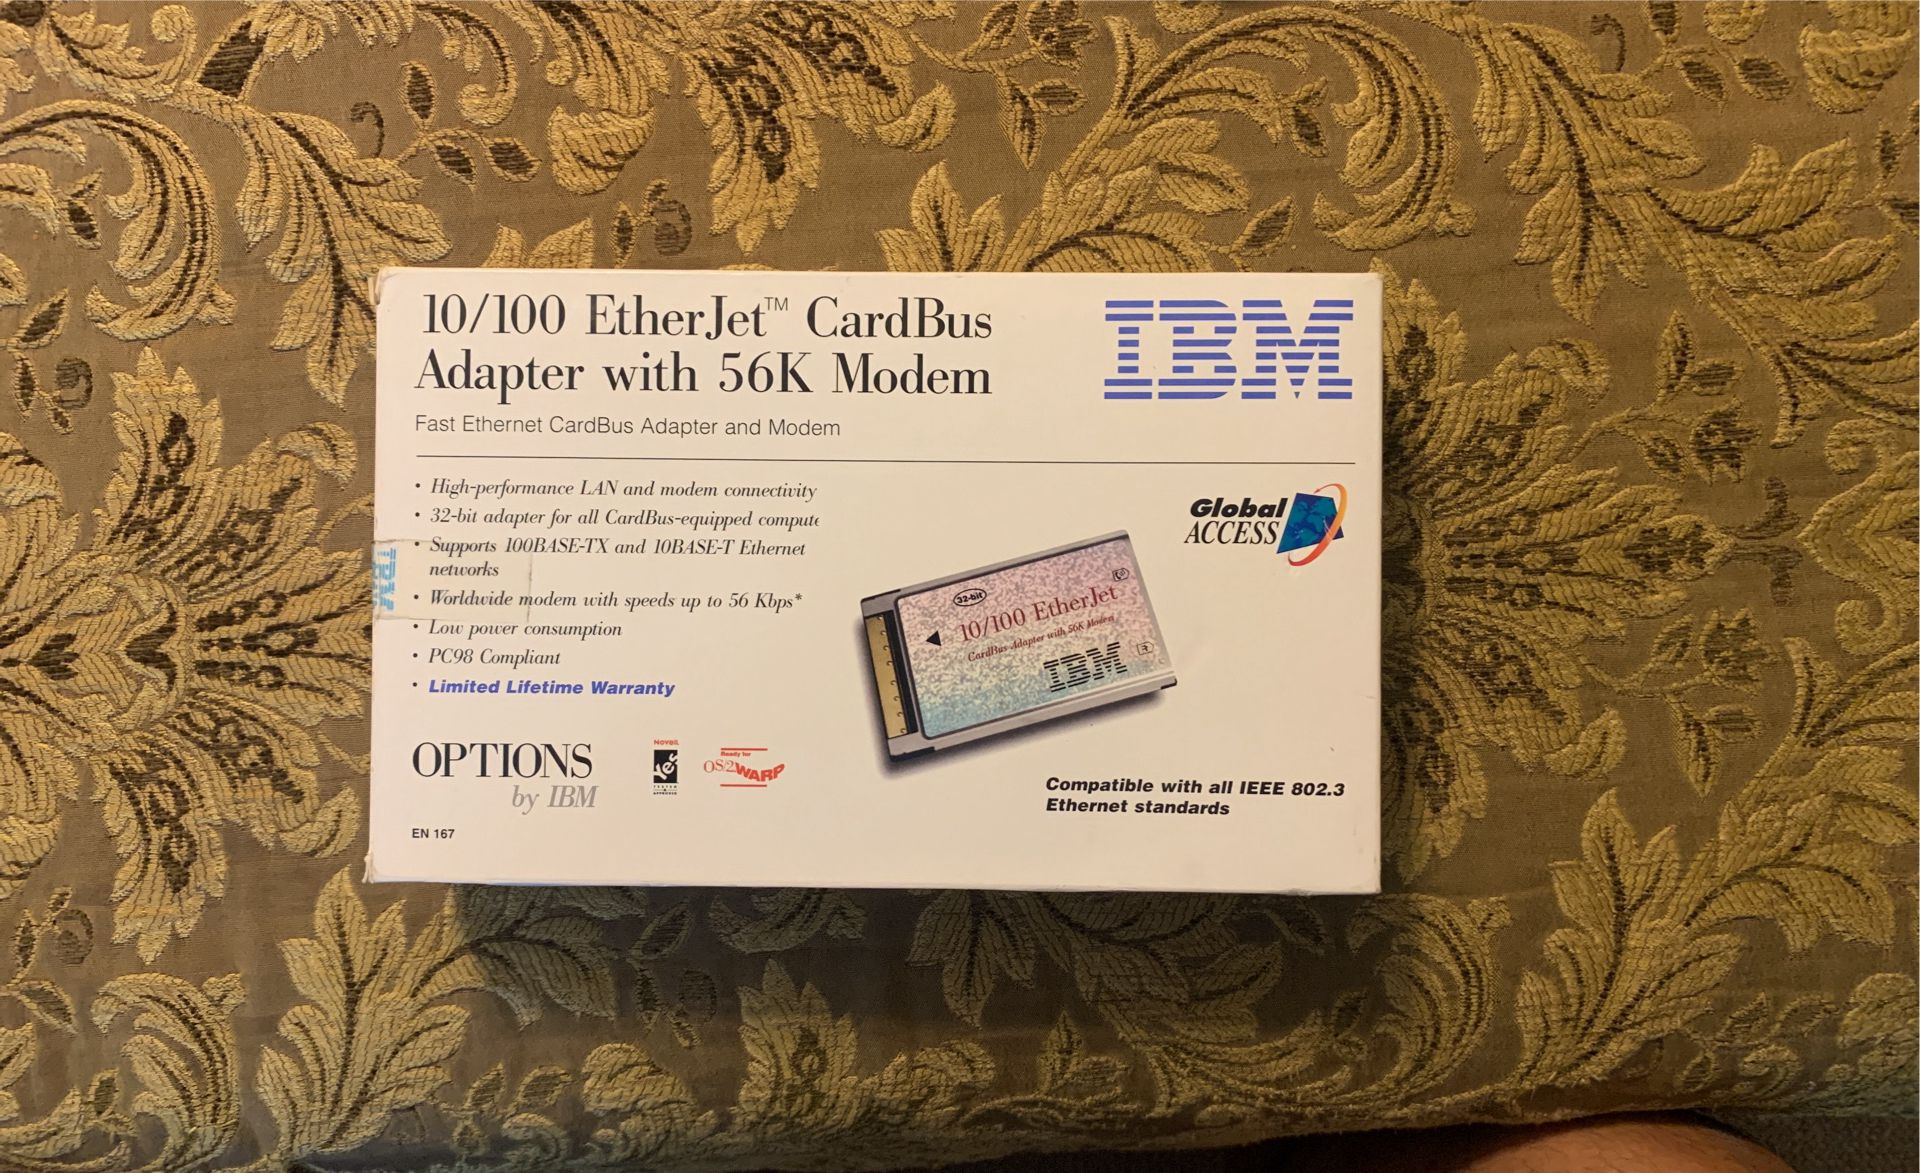 IBM EtherJet CardBus 10/100 Ethernet LAN Adapter PC Card + Dongle Cable